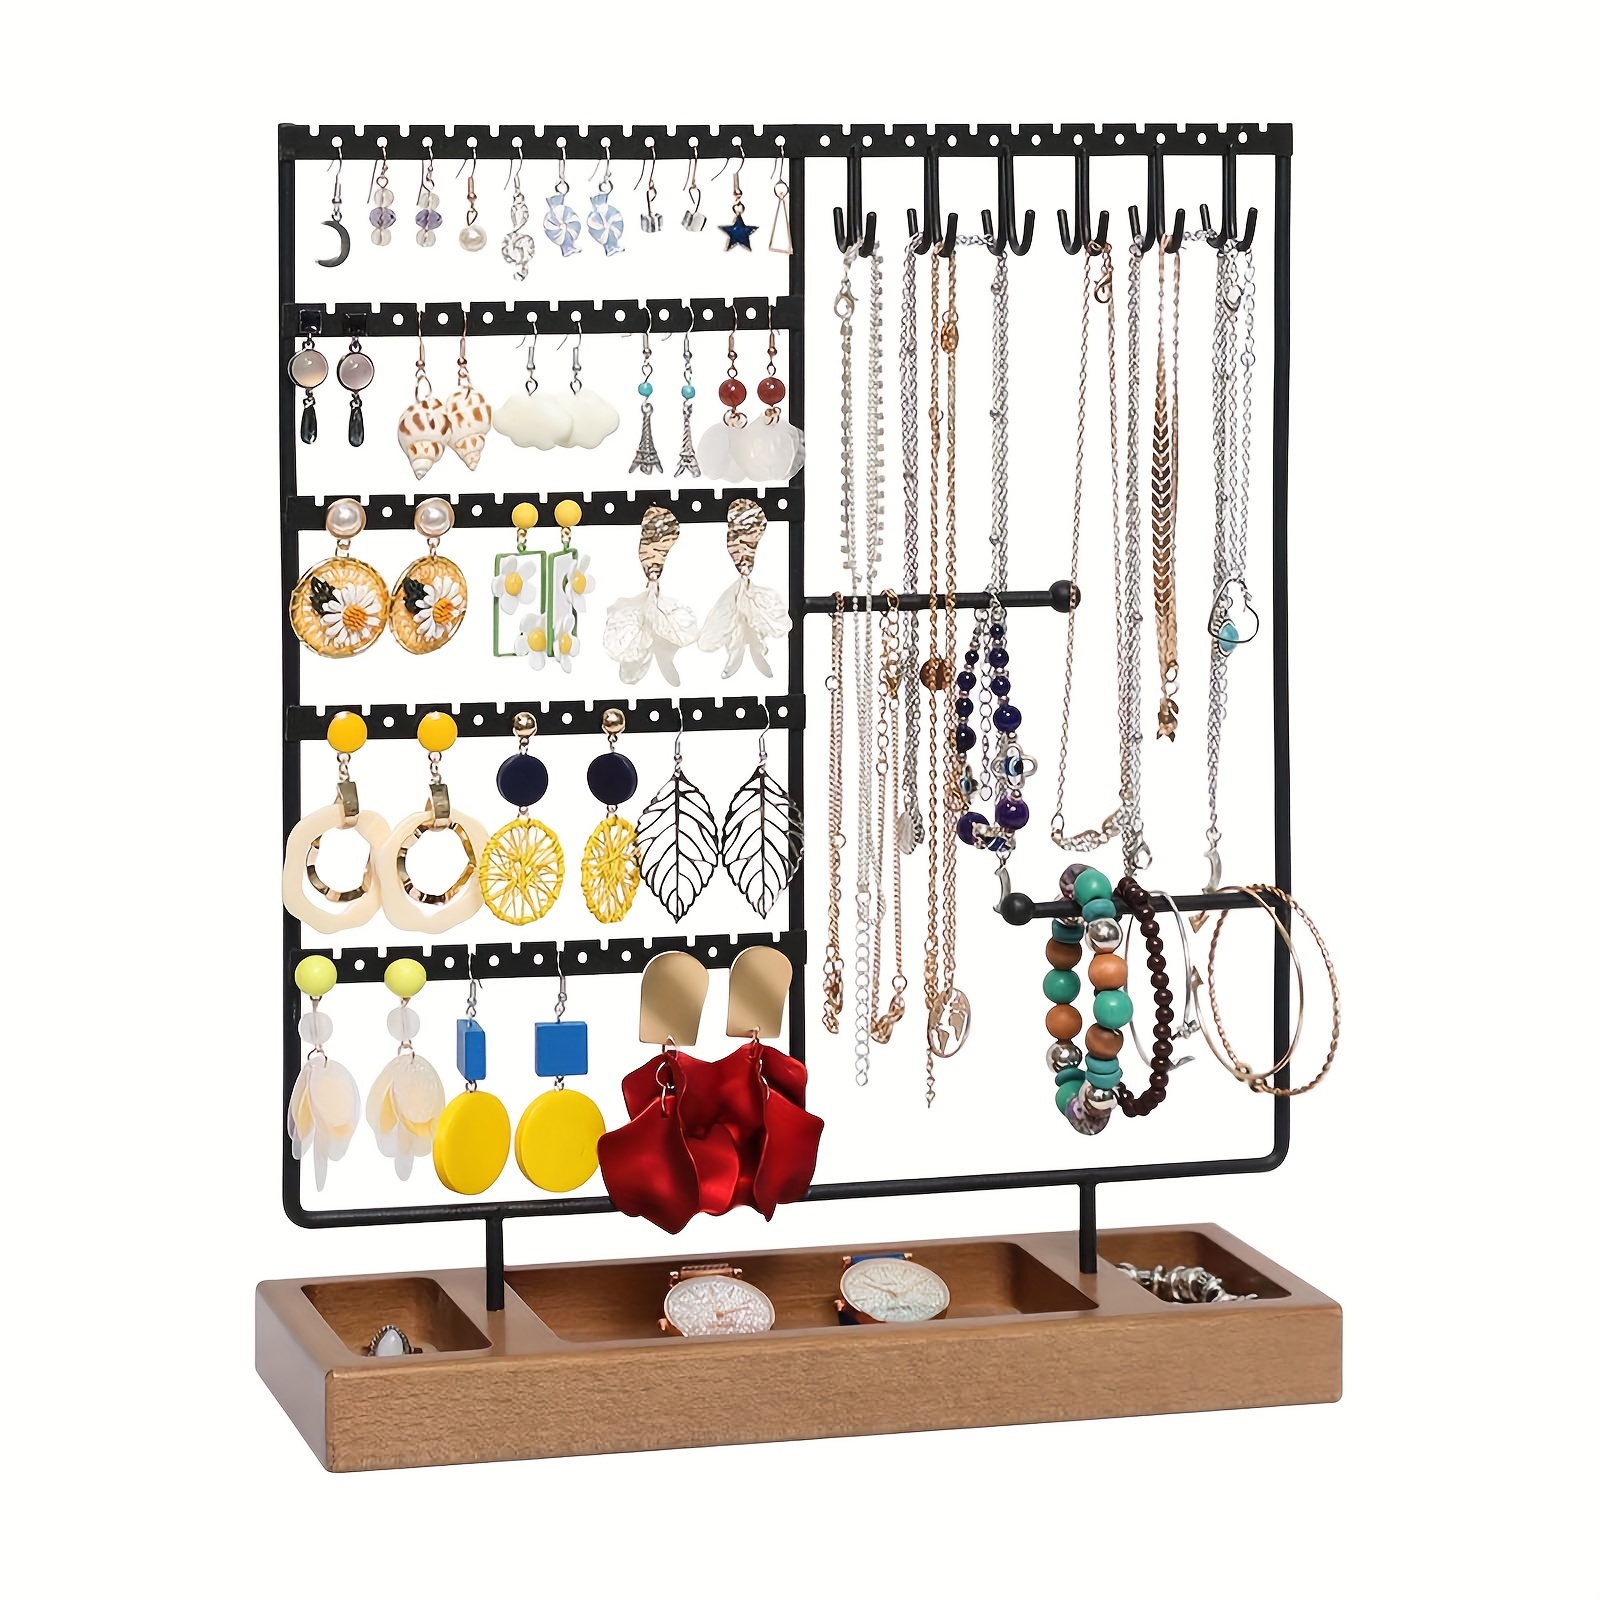 

1pc 5-tier Earring Holder With Wooden Tray, Ear Stud Holder Jewelry Organizer For Earrings Necklaces Bracelets Watches And Rings, Earring Display Stand With 132 Holes